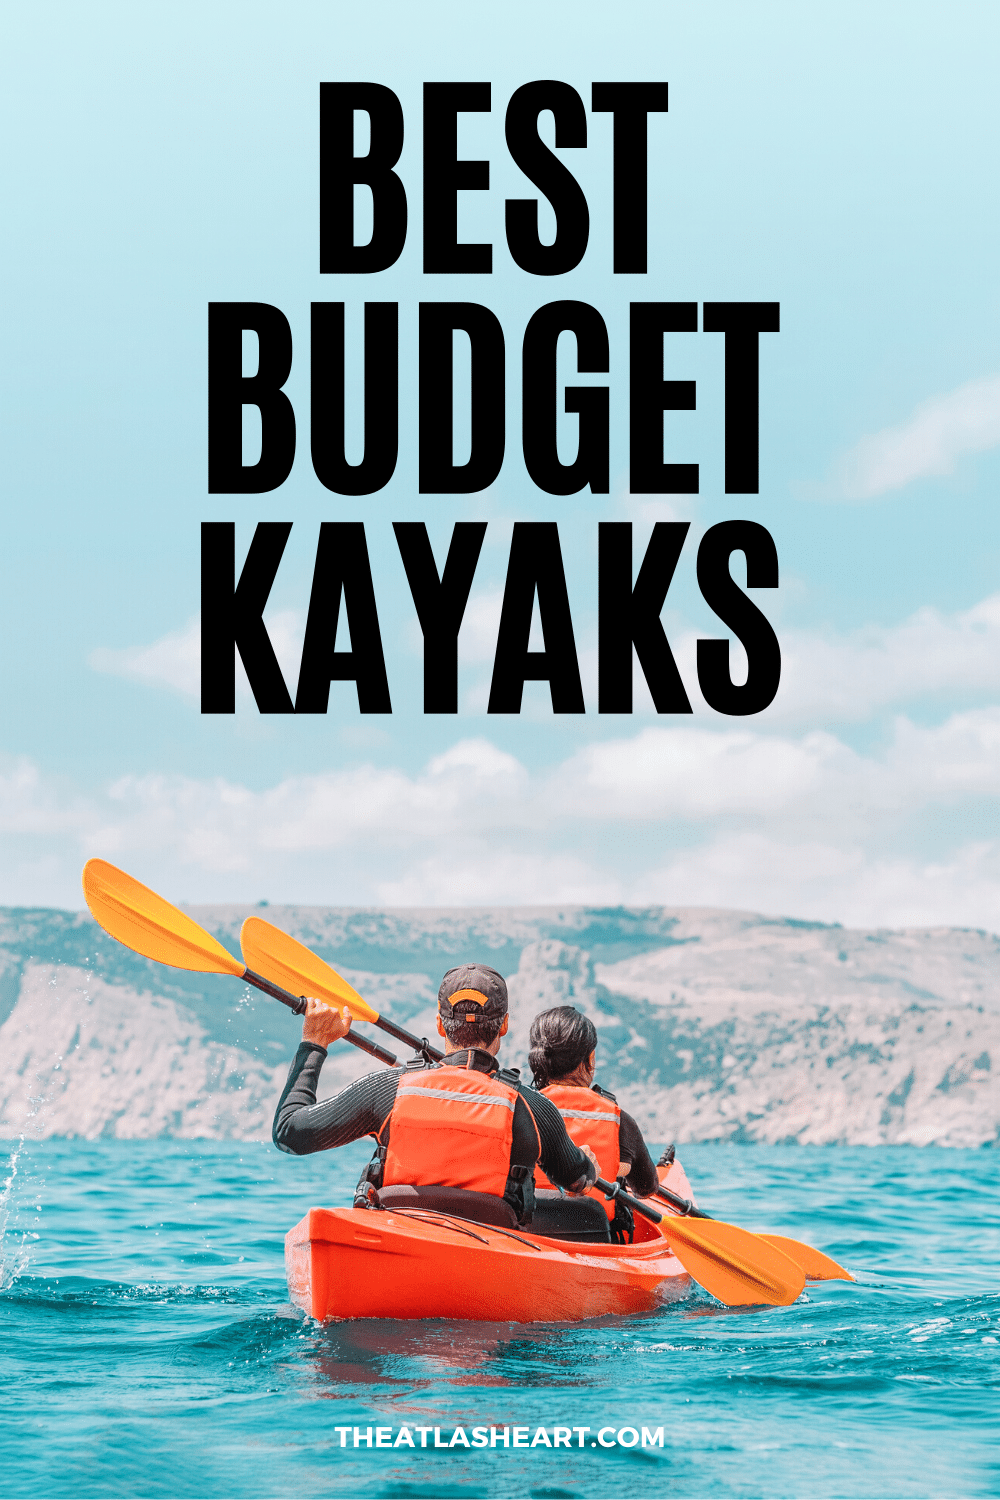 15 Best Budget Kayaks (So You Can Enjoy the Water for Less)